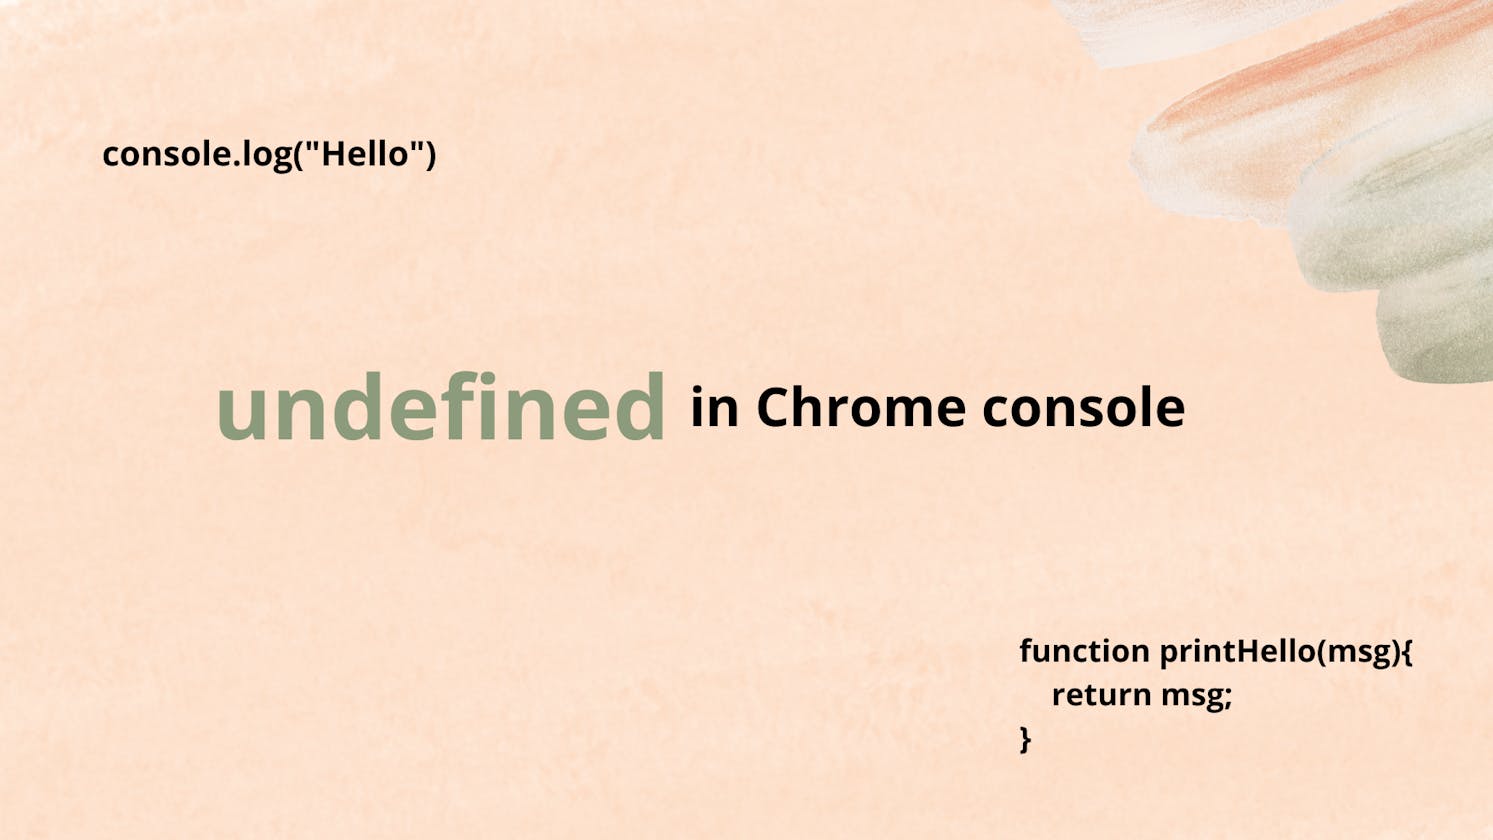 Why does Chrome console.log always append a line saying 'undefined'?